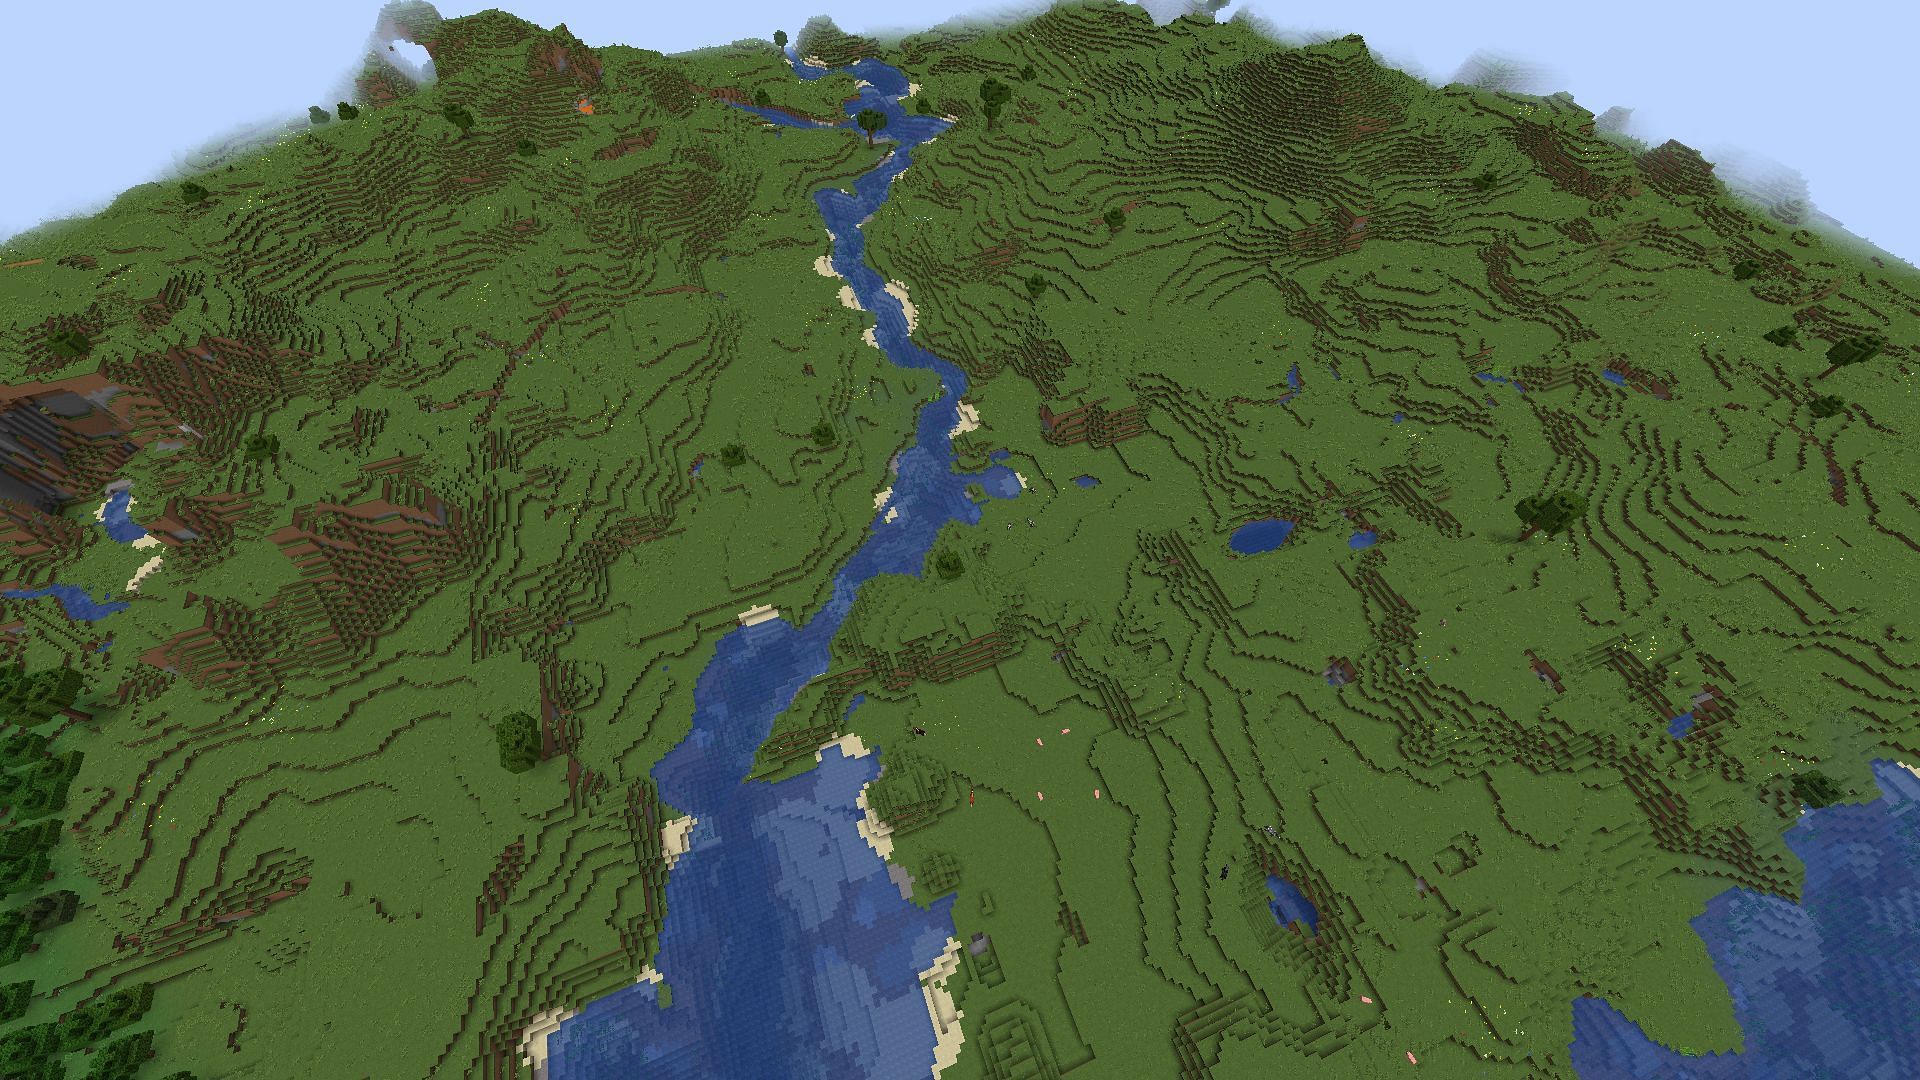 Grassland is easy to work with when it comes to building in Minecraft (Image via Mojang)